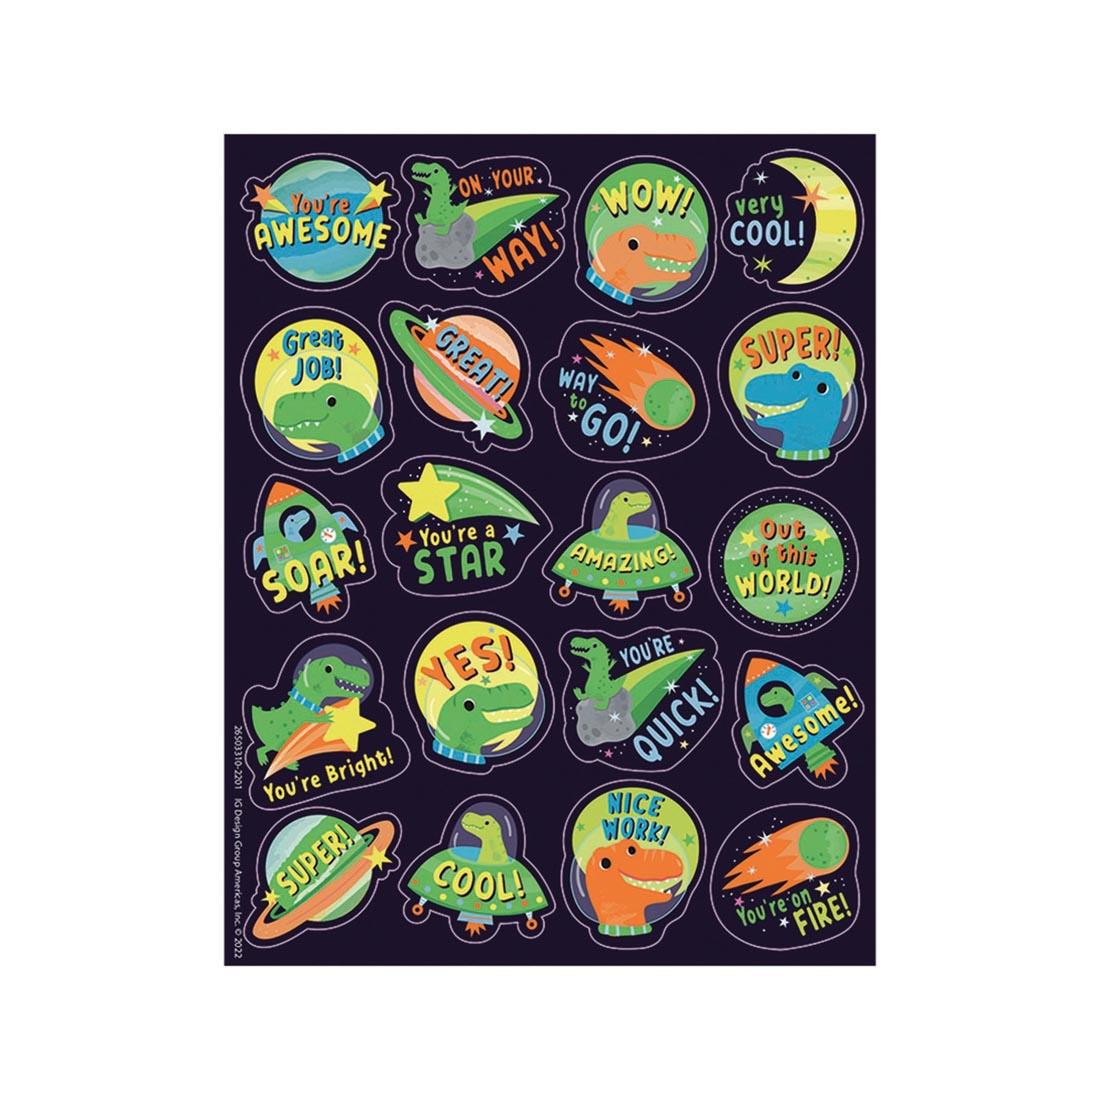 Sample sheet of Dinosaur Green Apple Scented Stickers, featuring various dinosaurs and space-themed items, By Eureka